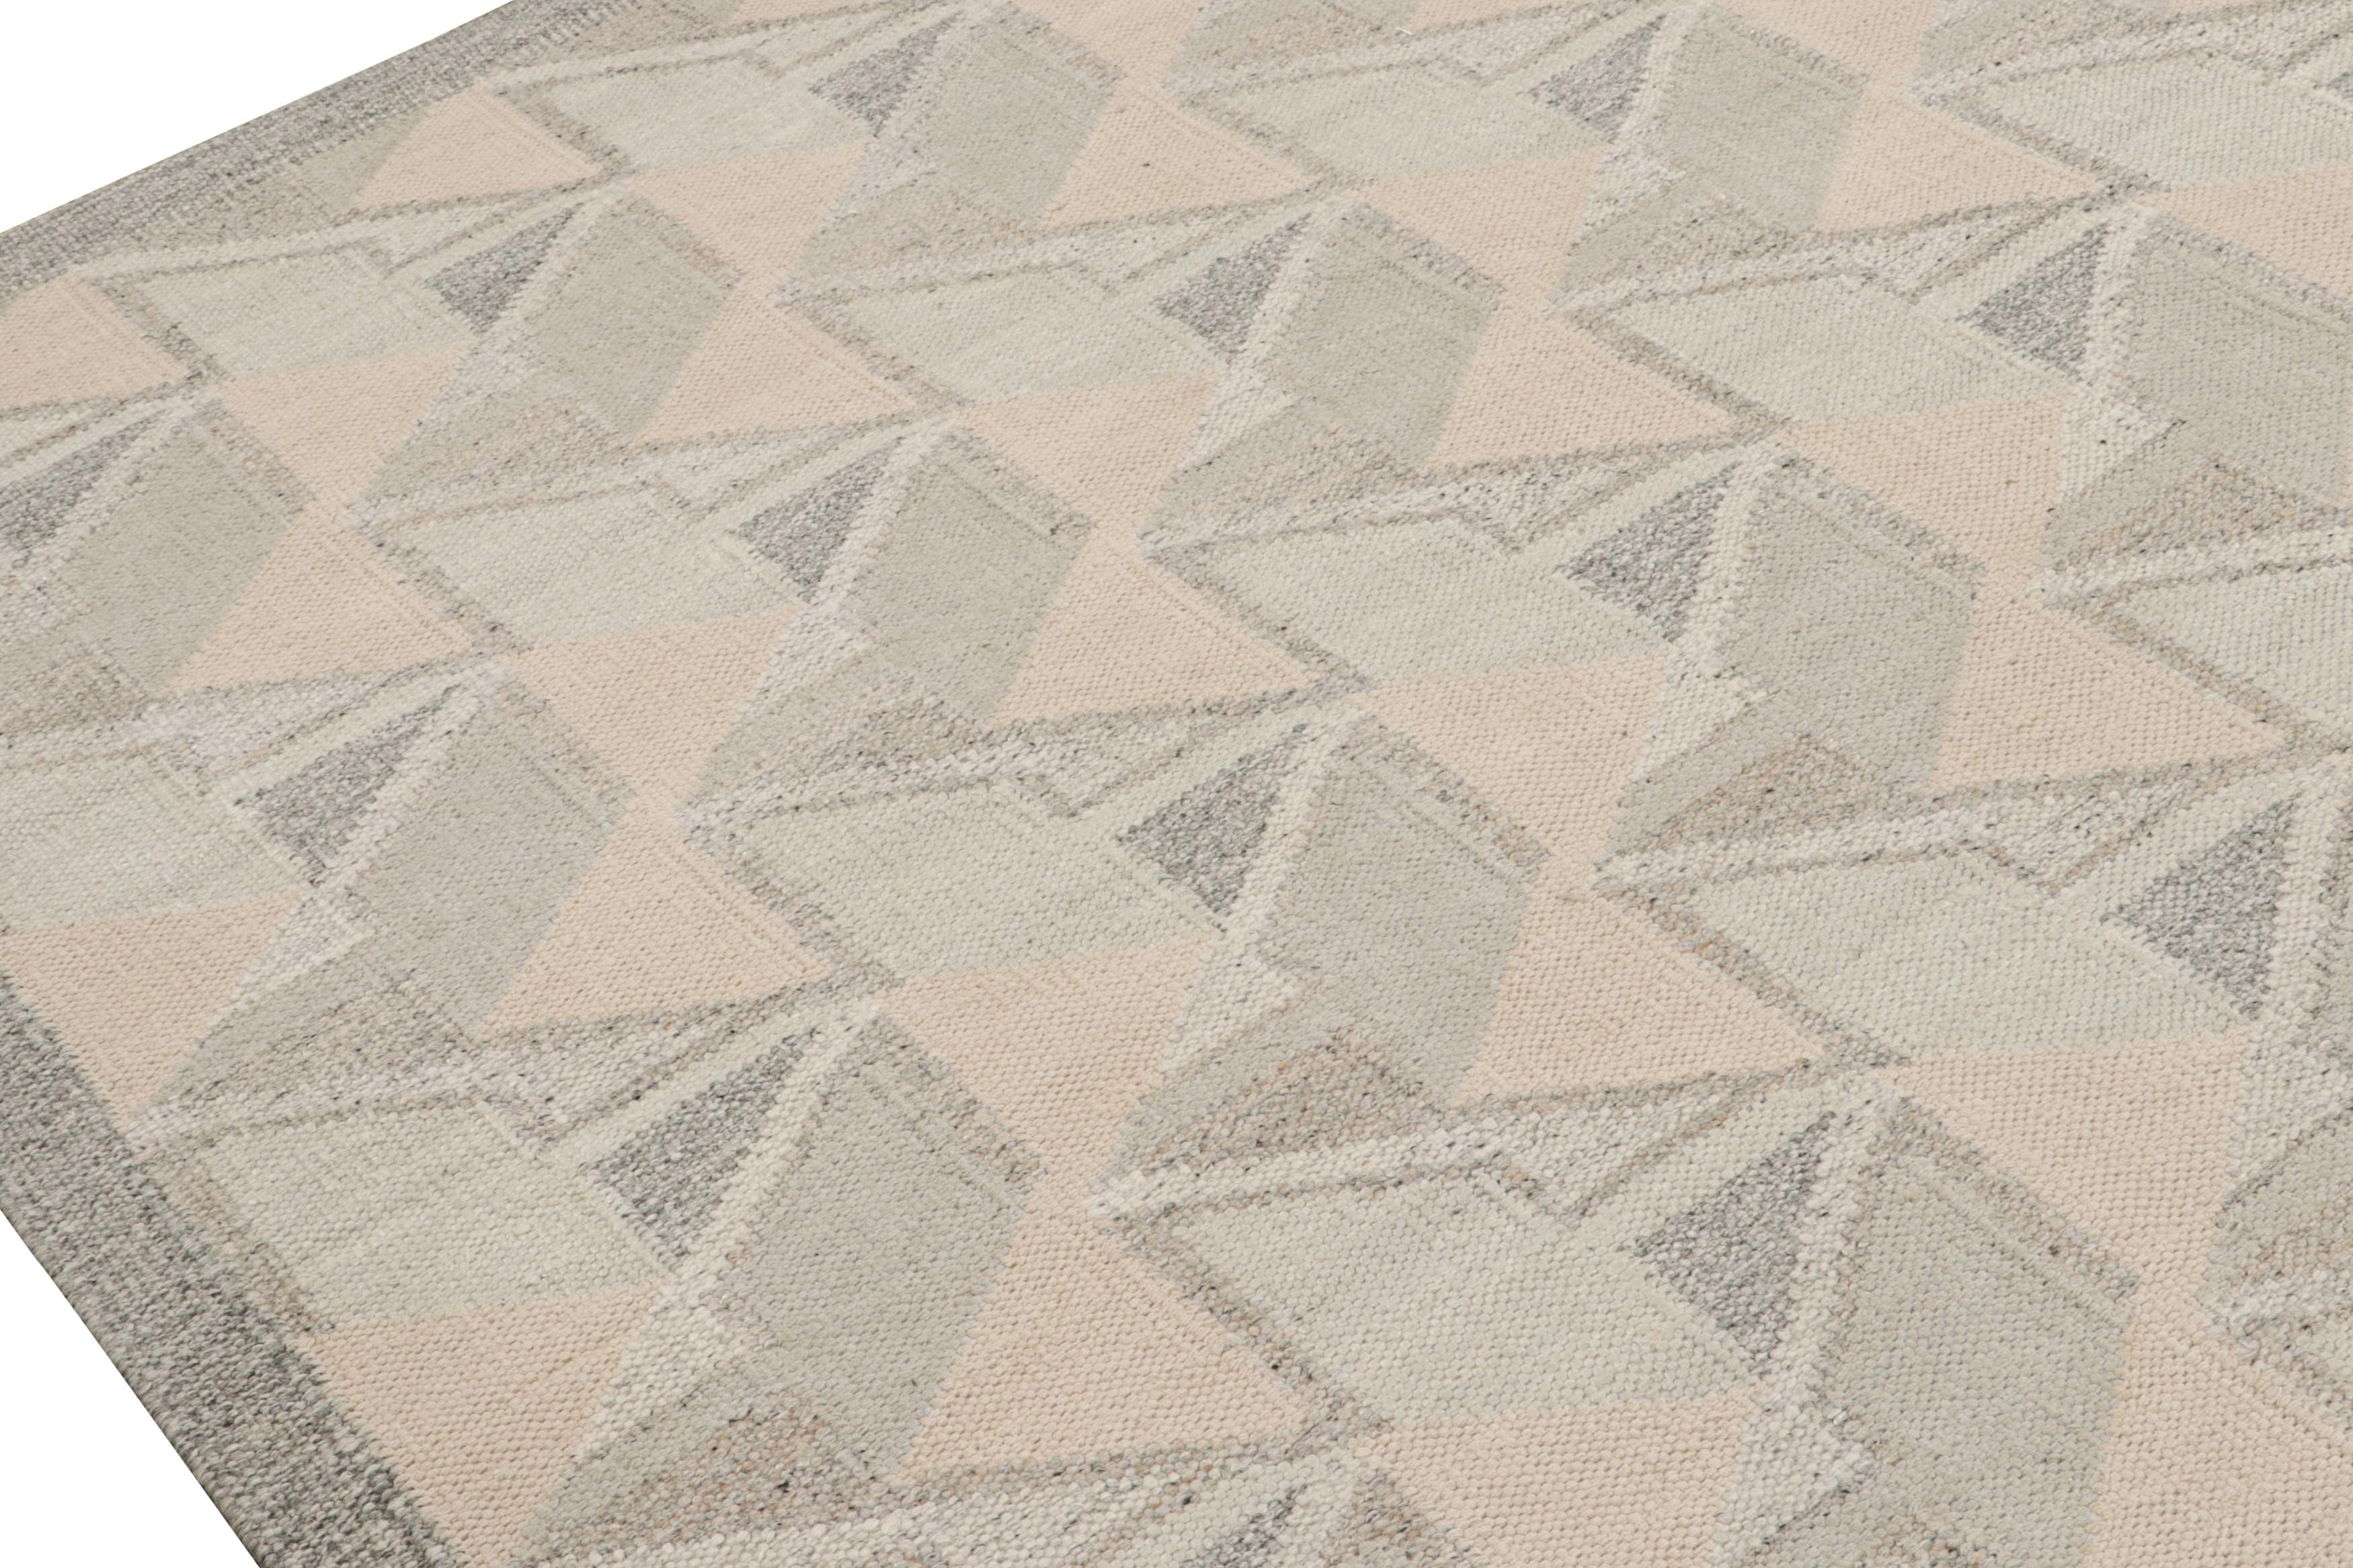 Rug & Kilim’s Scandinavian Style Kilim in gray, Beige, White Patterns In New Condition For Sale In Long Island City, NY